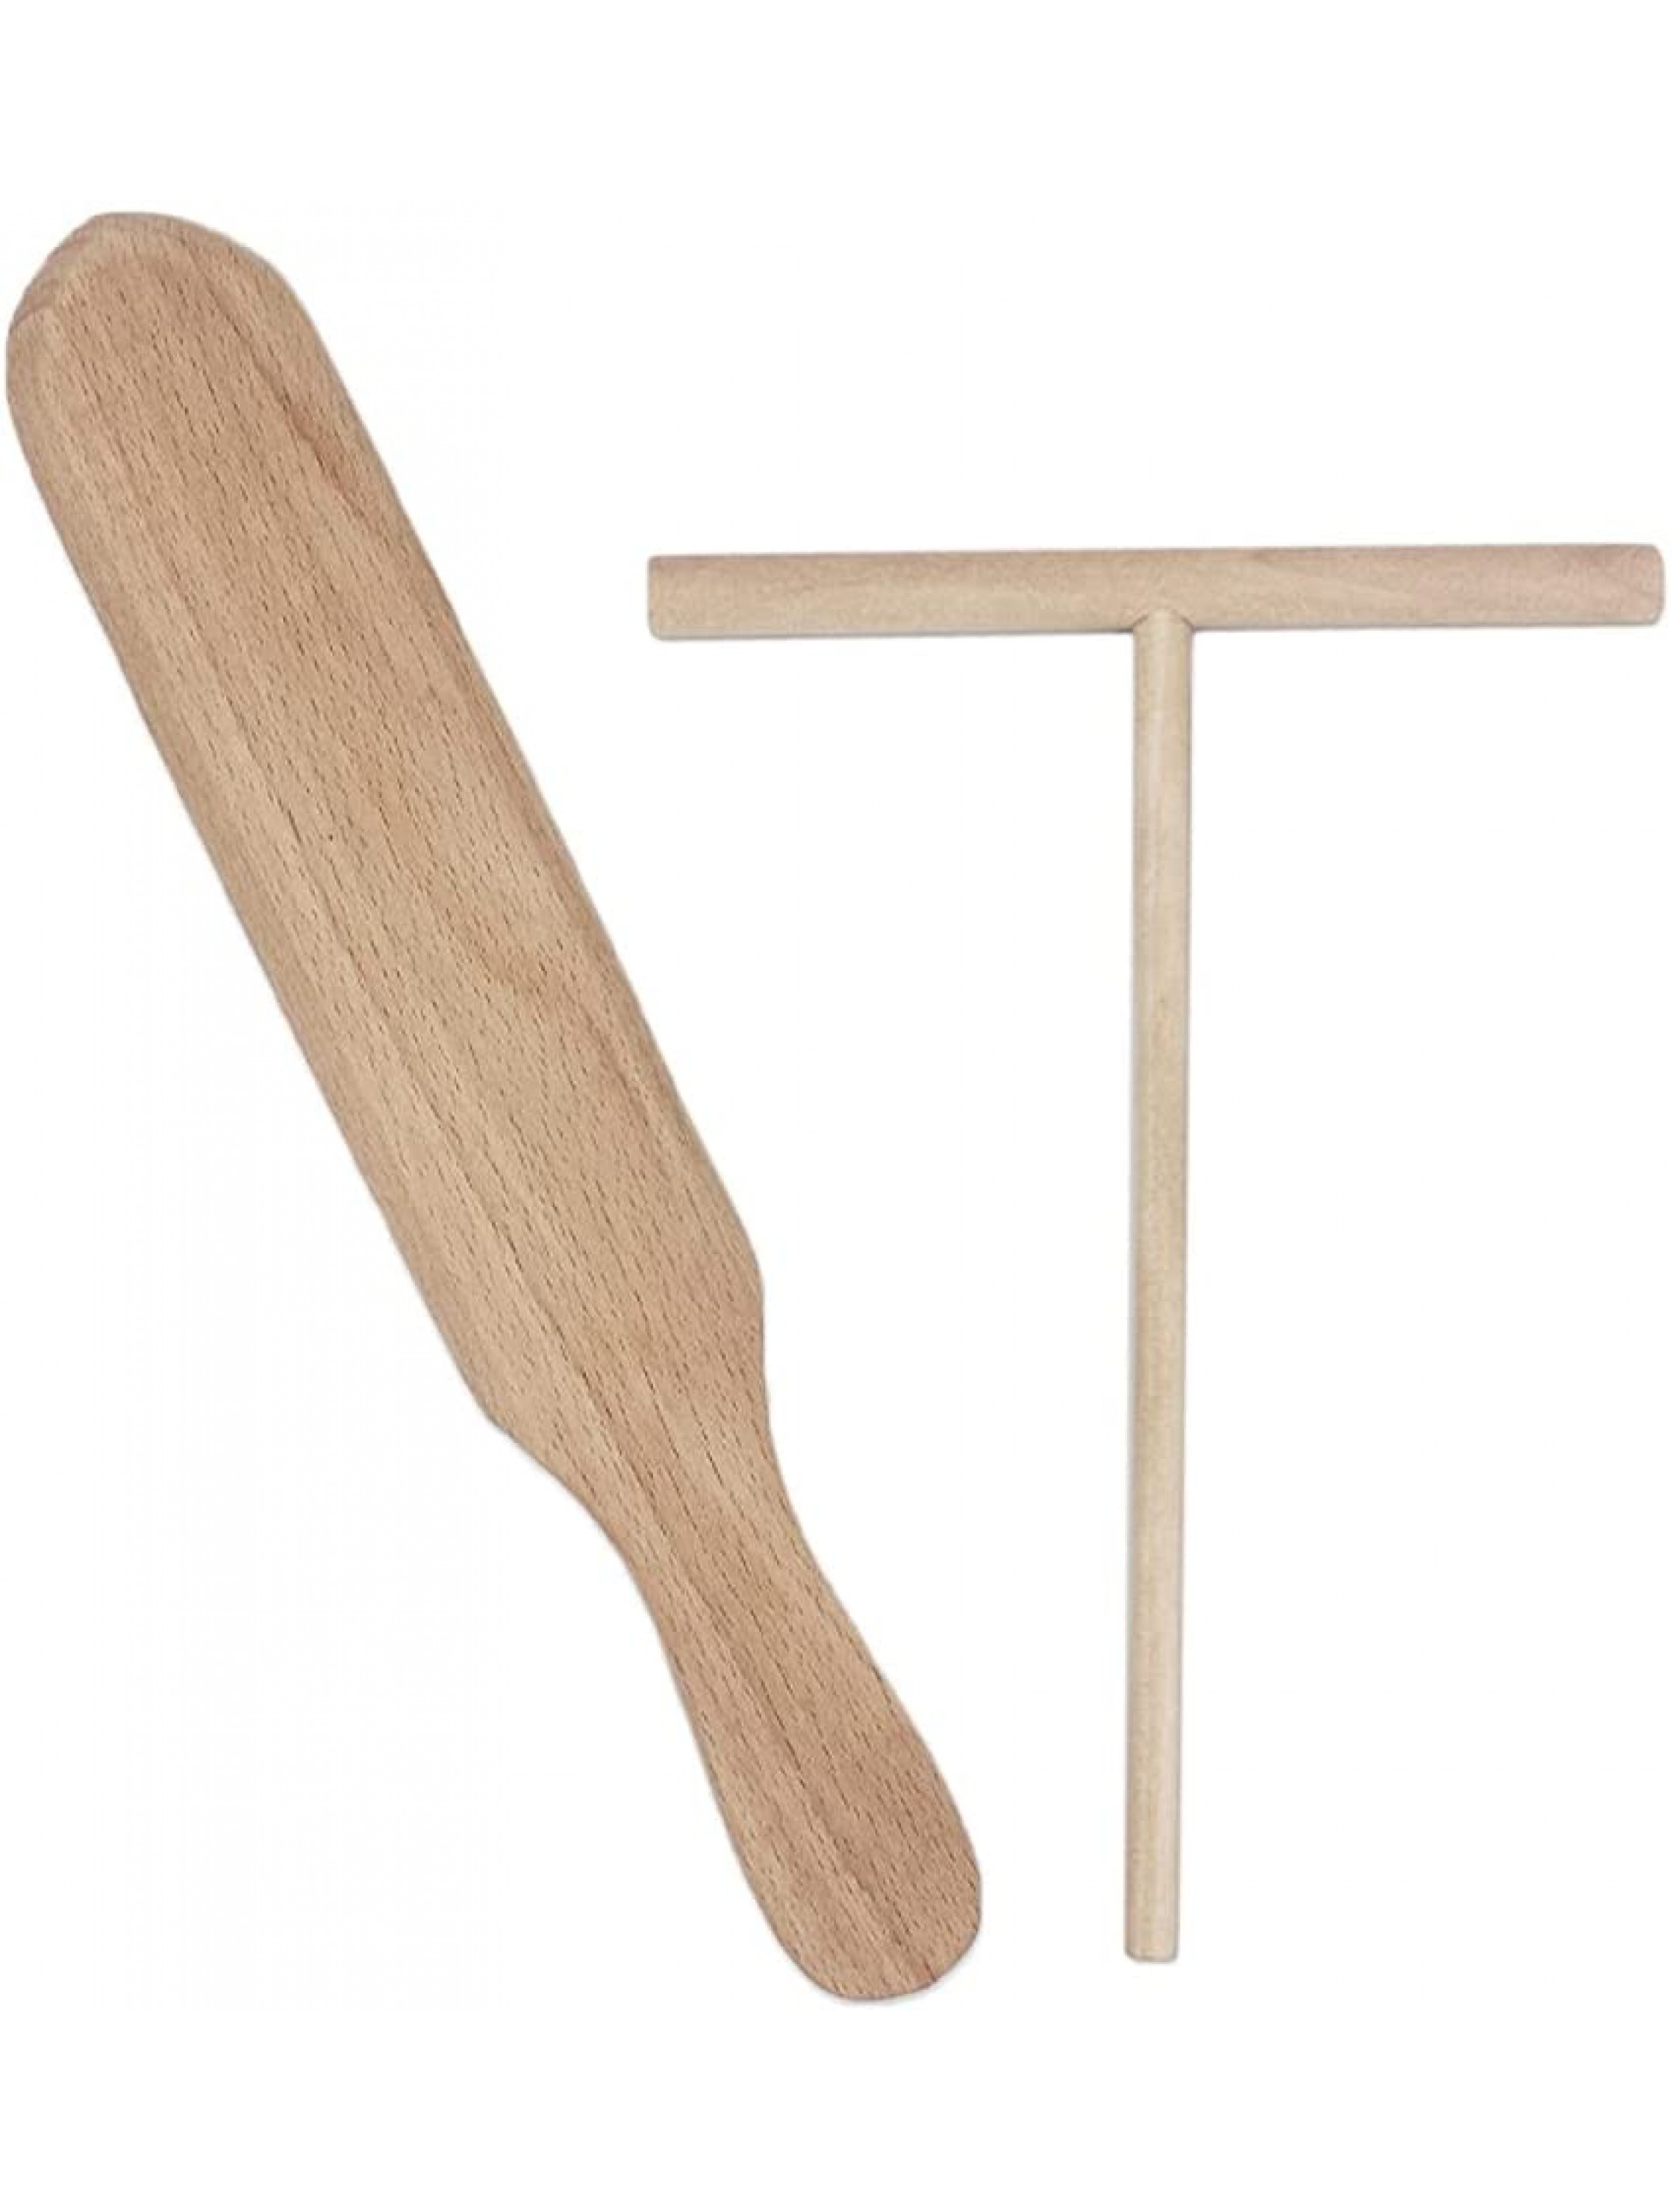 LIRITEDB Crepe Spreader and Spatula Kit 2 Piece Set 5” Spreader and 10” Spatula Spreaders Set ,Convenient Sizes to Fit Any Crepe Pan Maker | All Natural Beechwood T-Shape - BXYBDCSN2